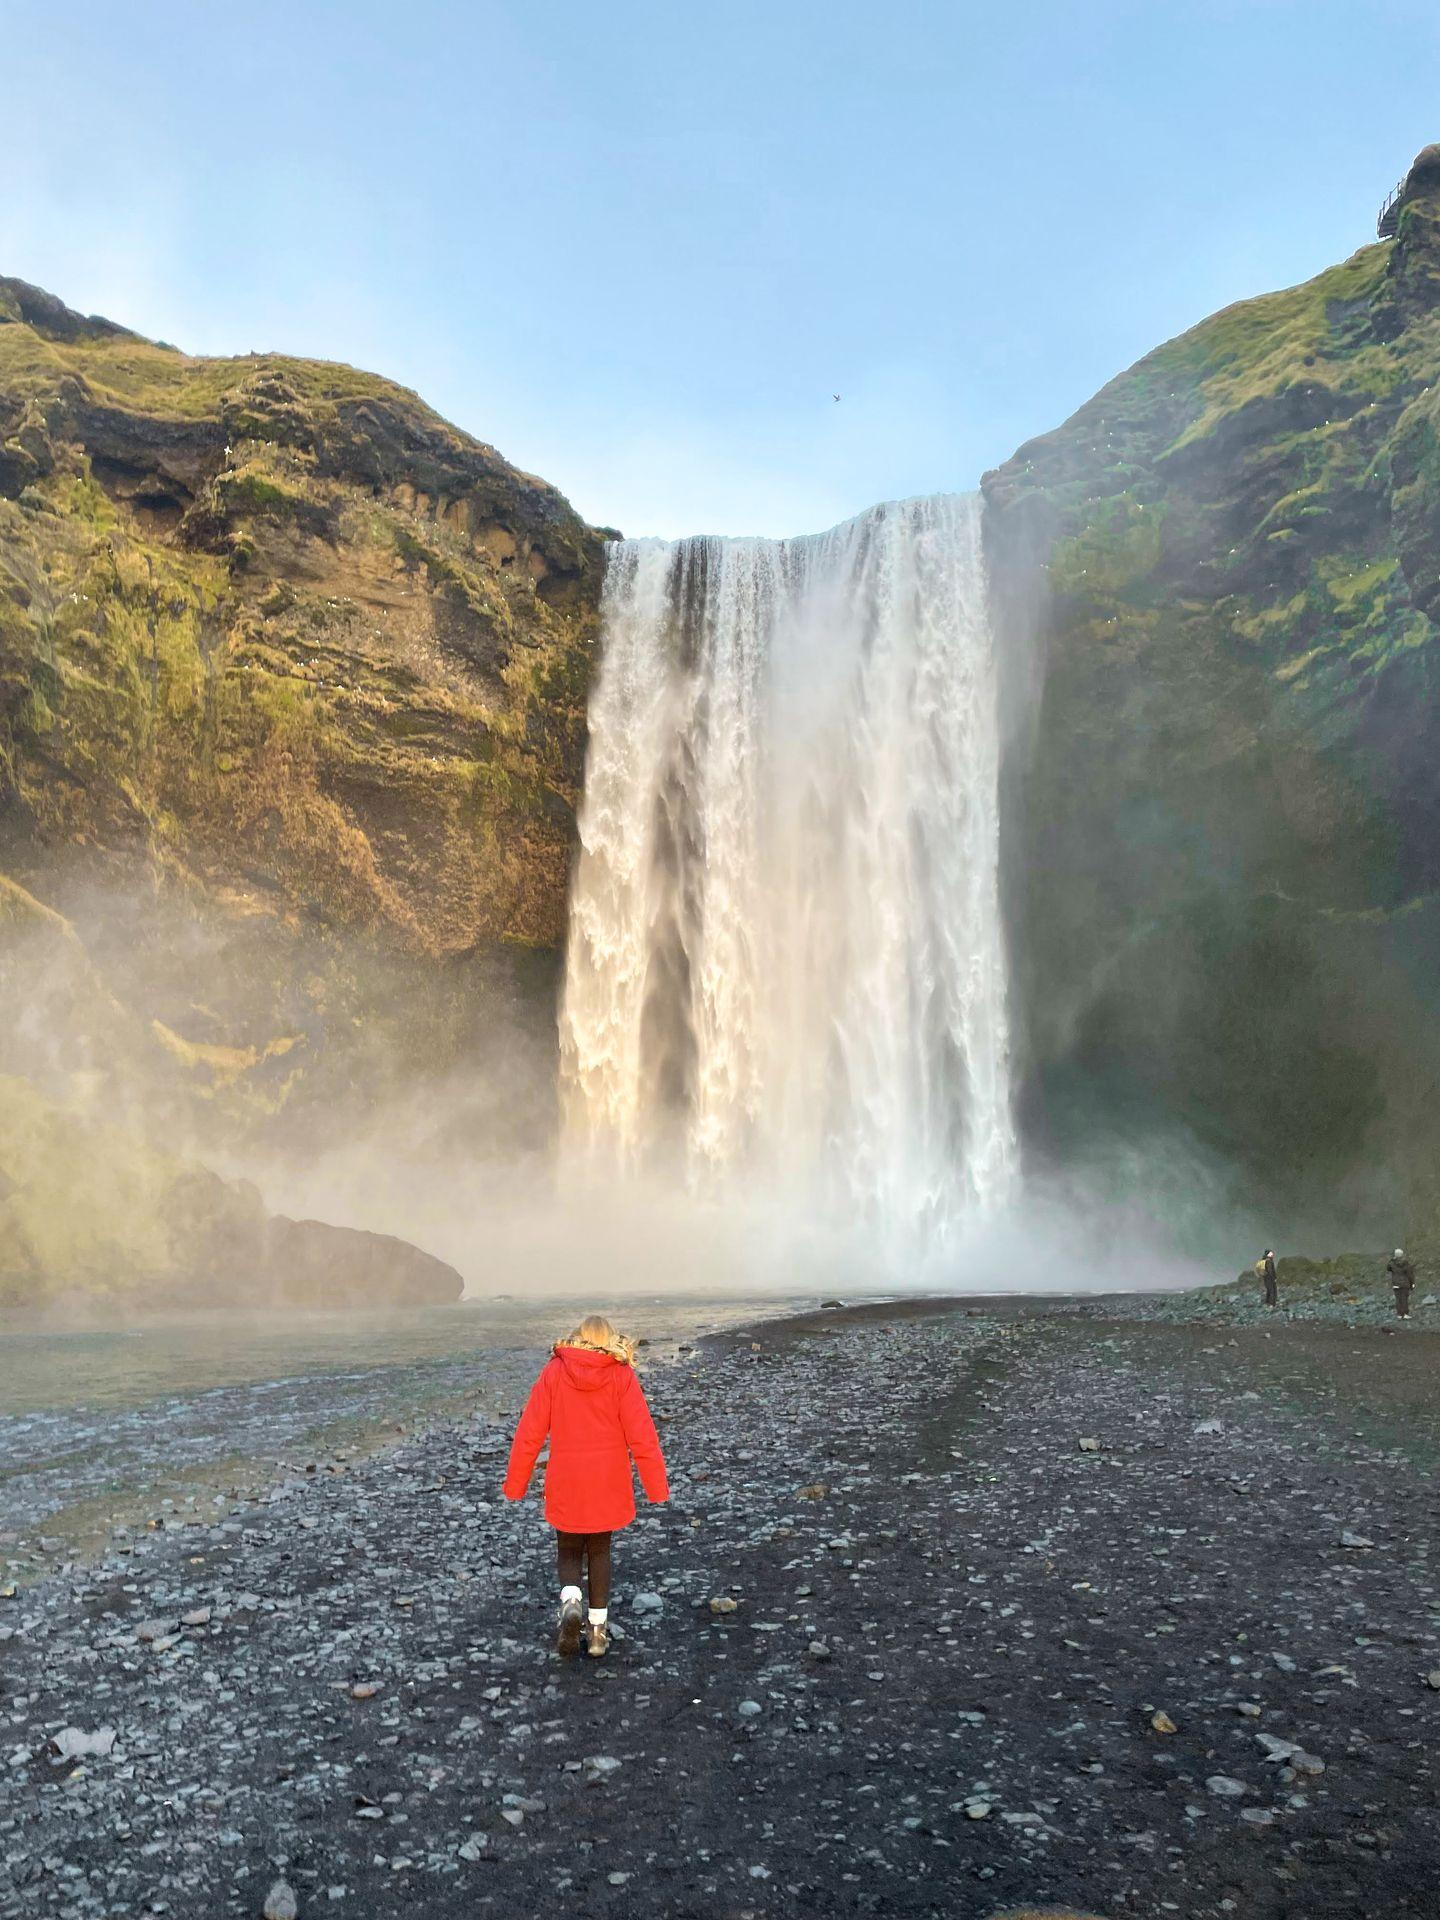 Lydia wearing a red coat and walking towards the towering Skógafoss